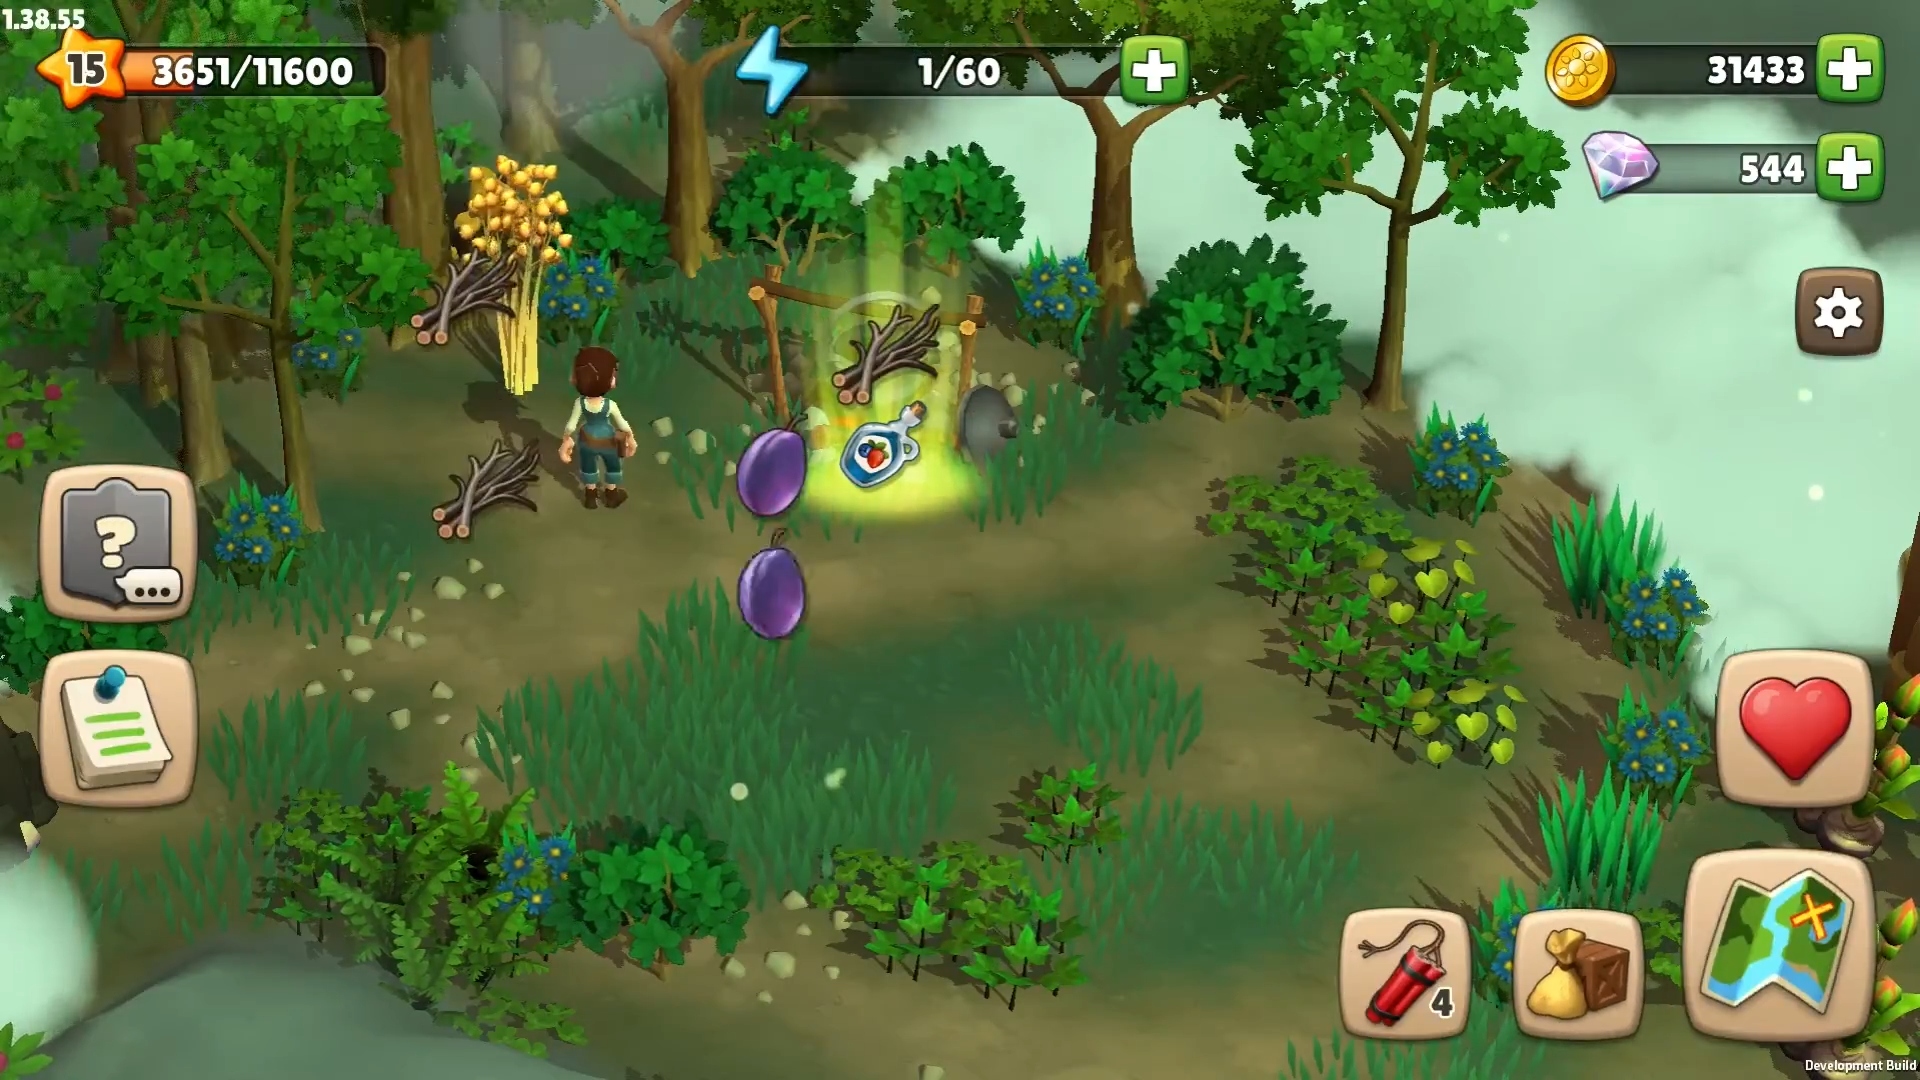 Best farm games - Sunrise Village. A screenshot shows a character chopping wood in an area of overgrowth.